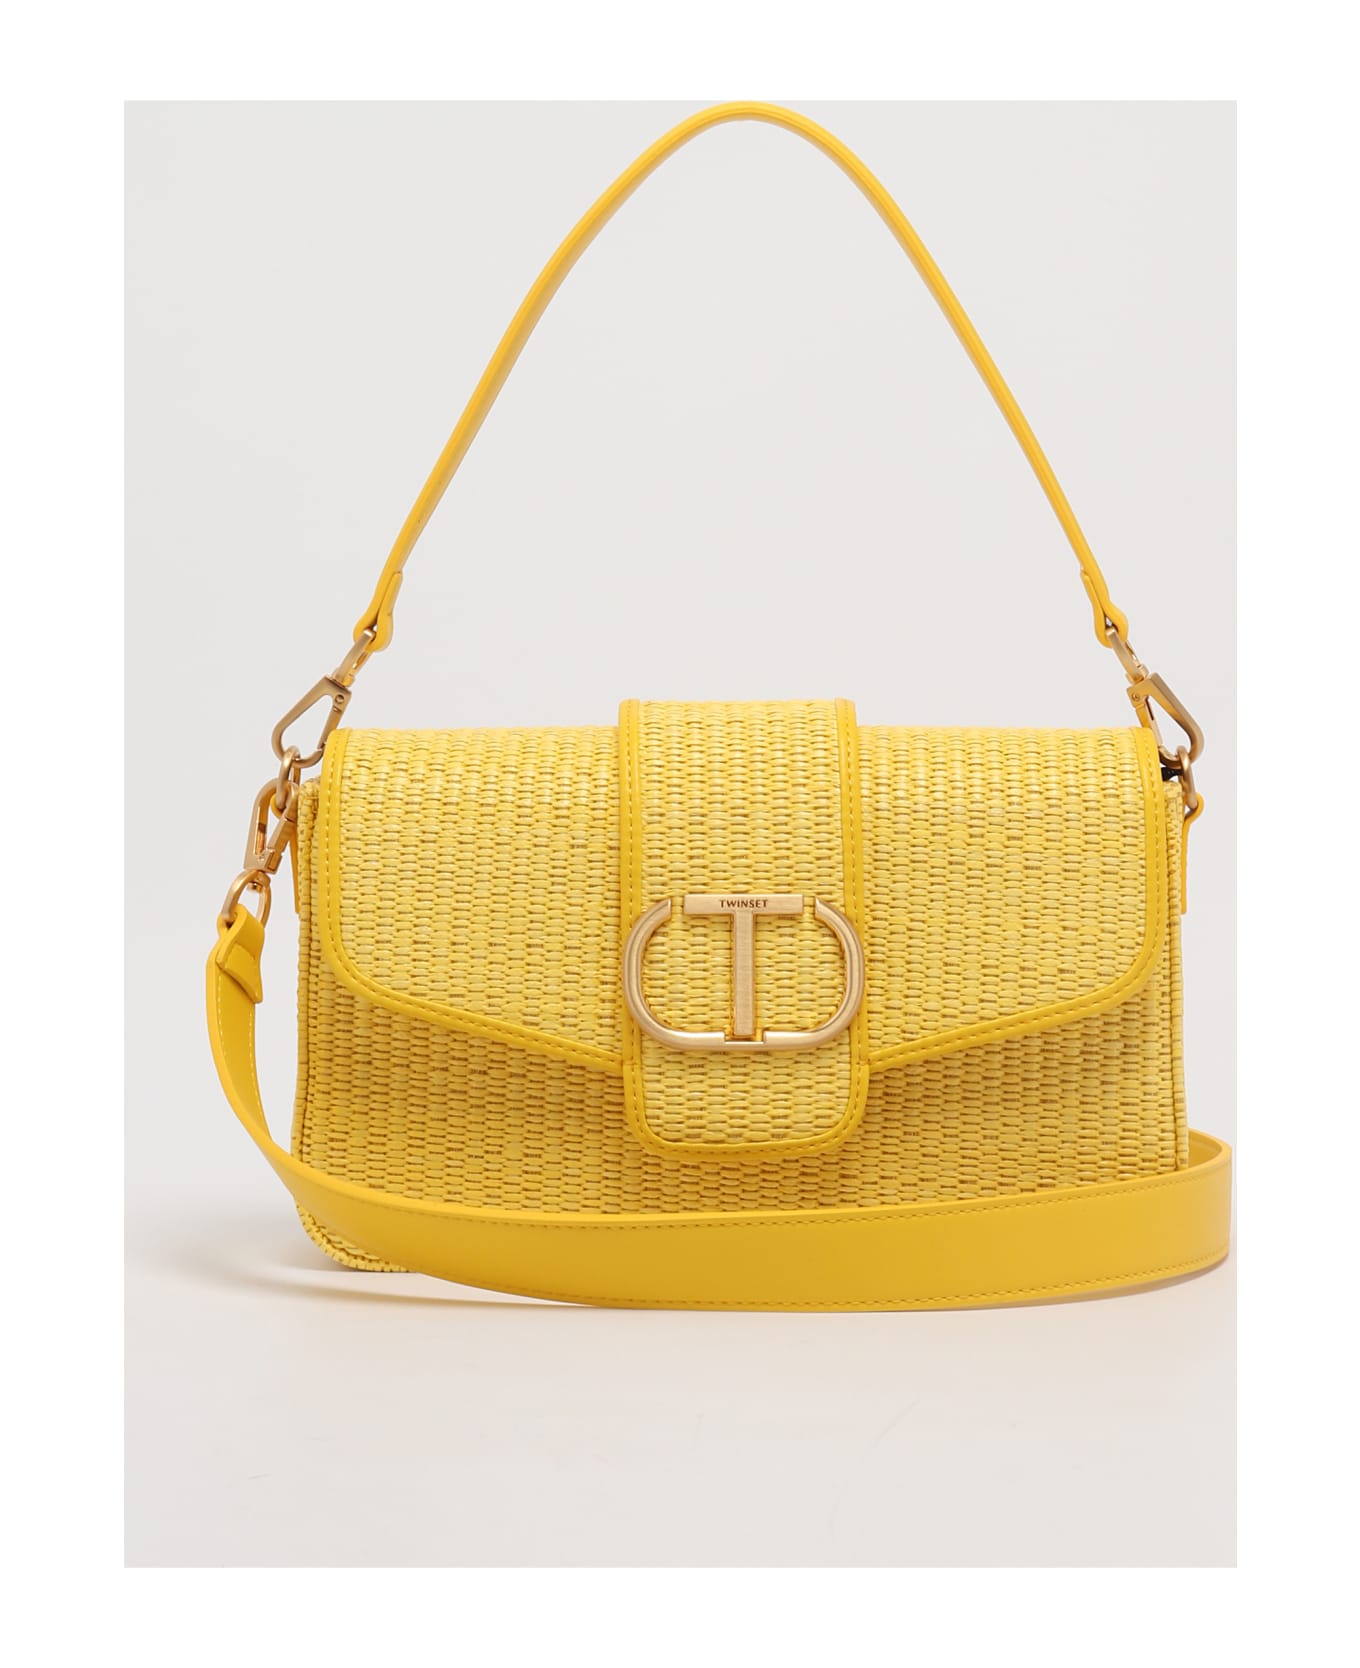 TwinSet Pp Clutch - GIALLO トートバッグ